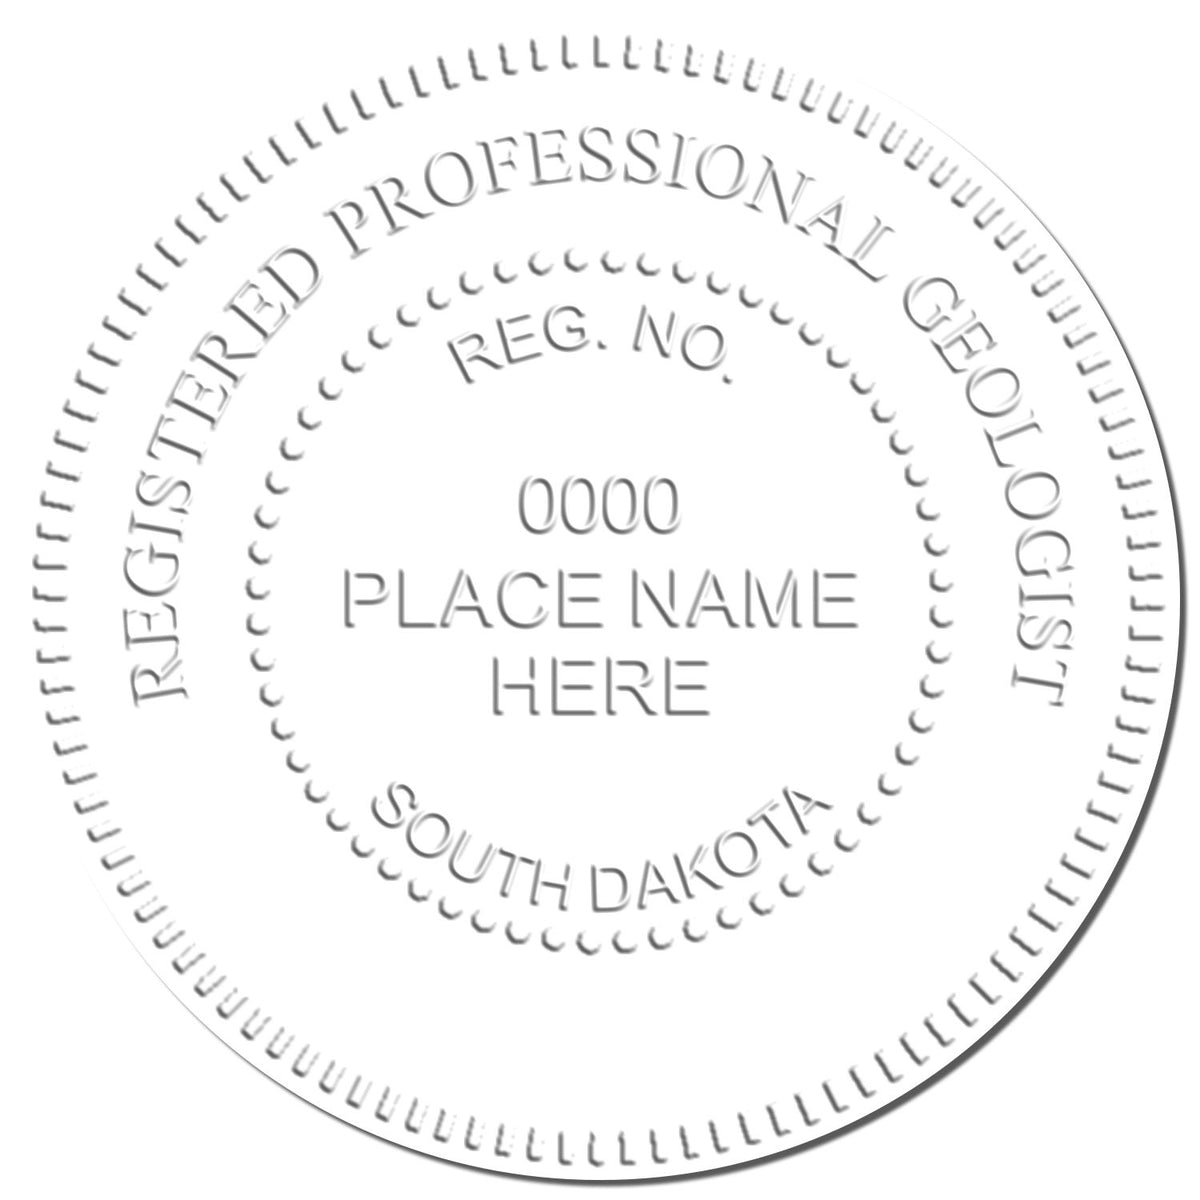 A photograph of the Hybrid South Dakota Geologist Seal stamp impression reveals a vivid, professional image of the on paper.